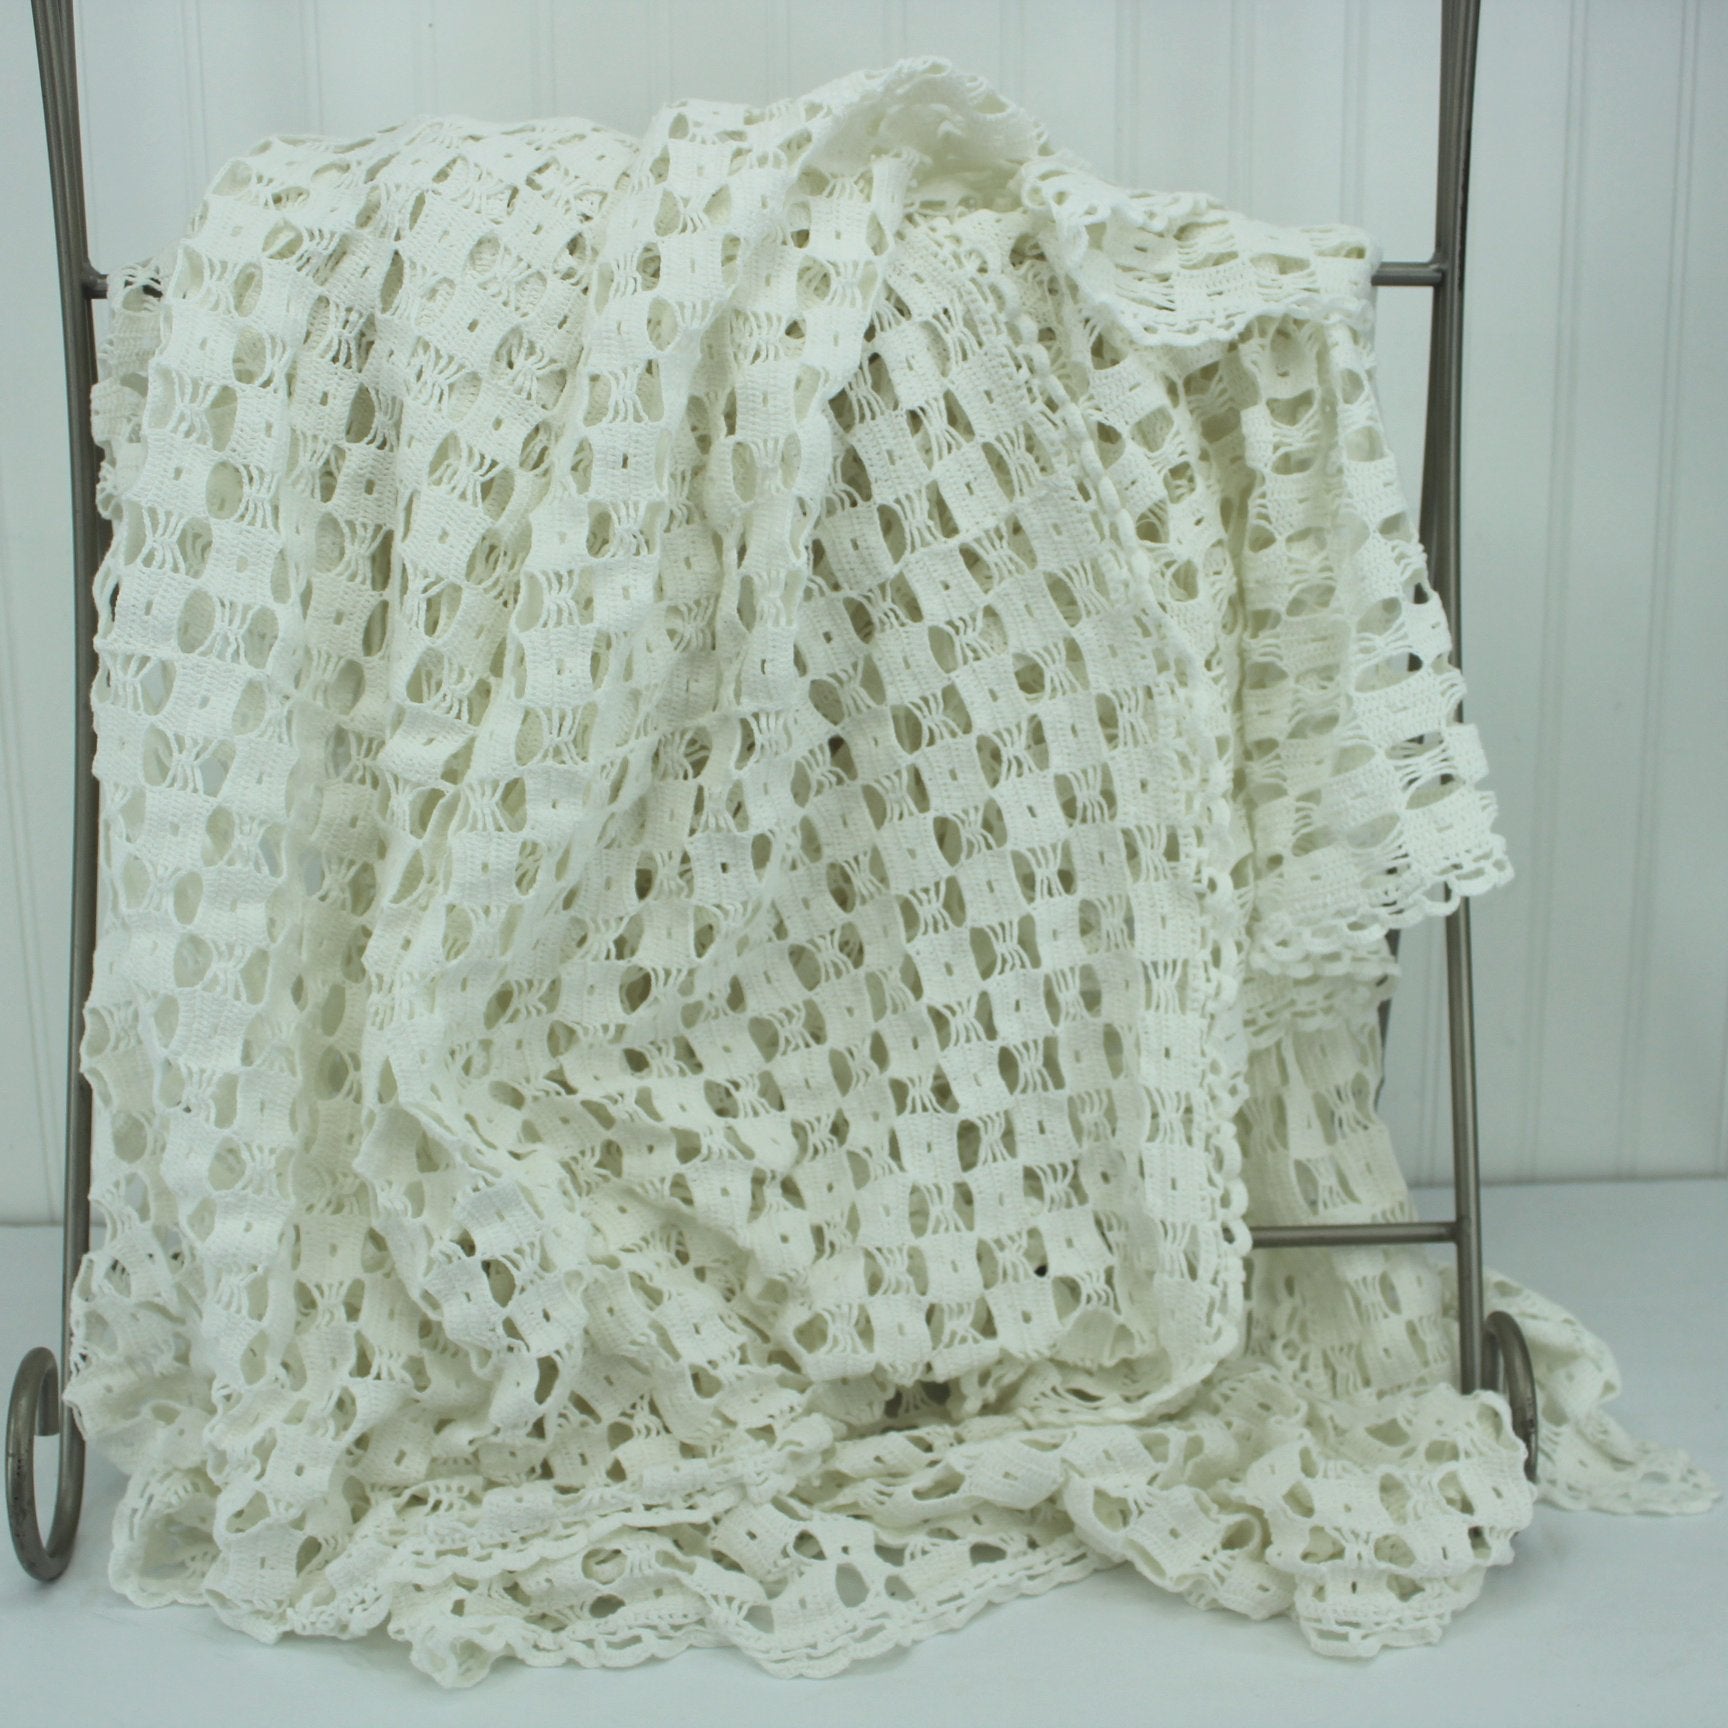 Crochet White Table Cloth Hand Made 75" X 90" special price for condition